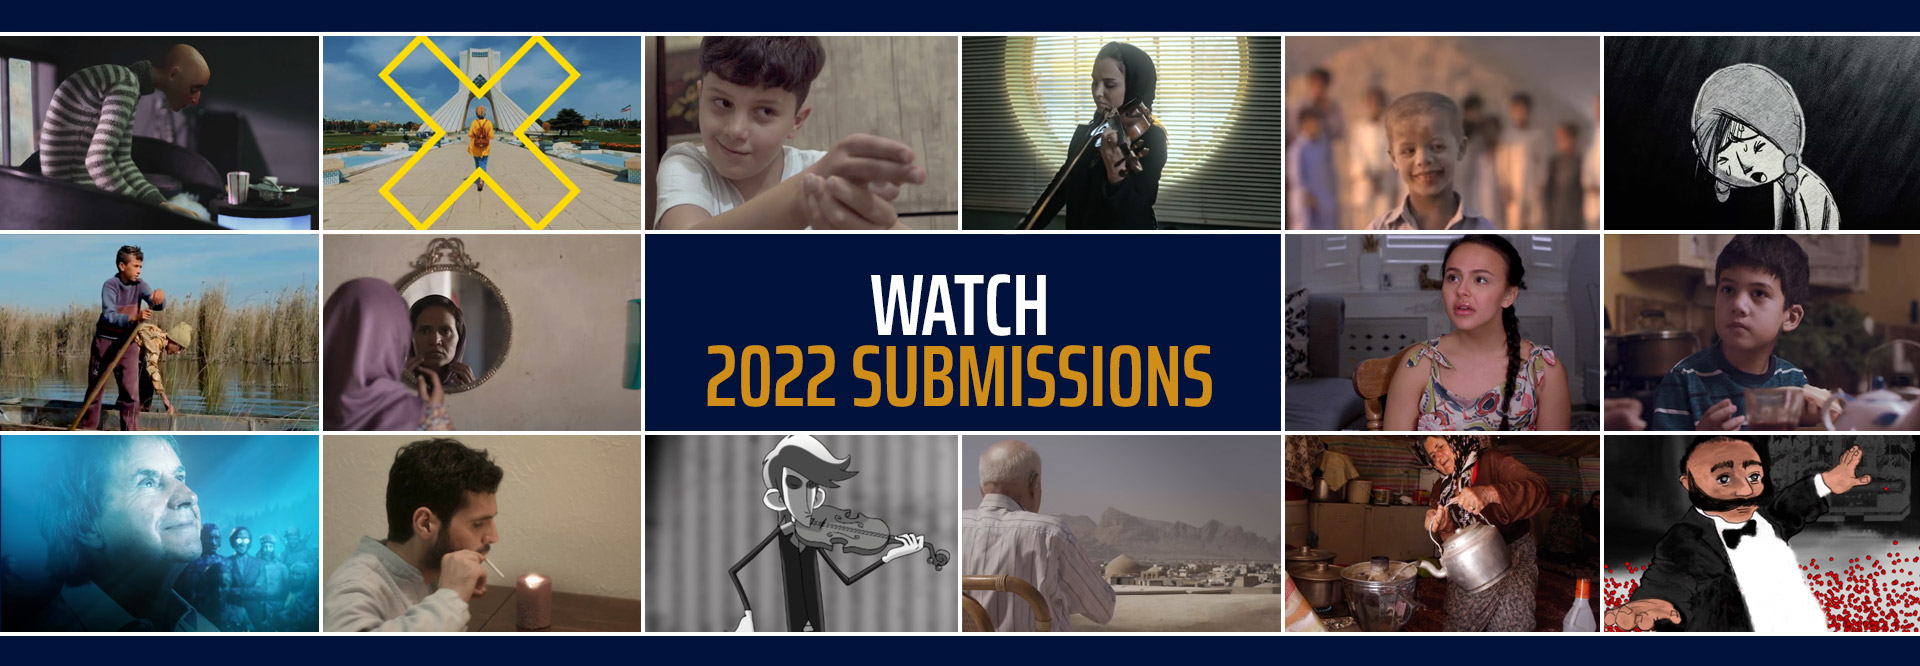 Watch 2022 Submissions